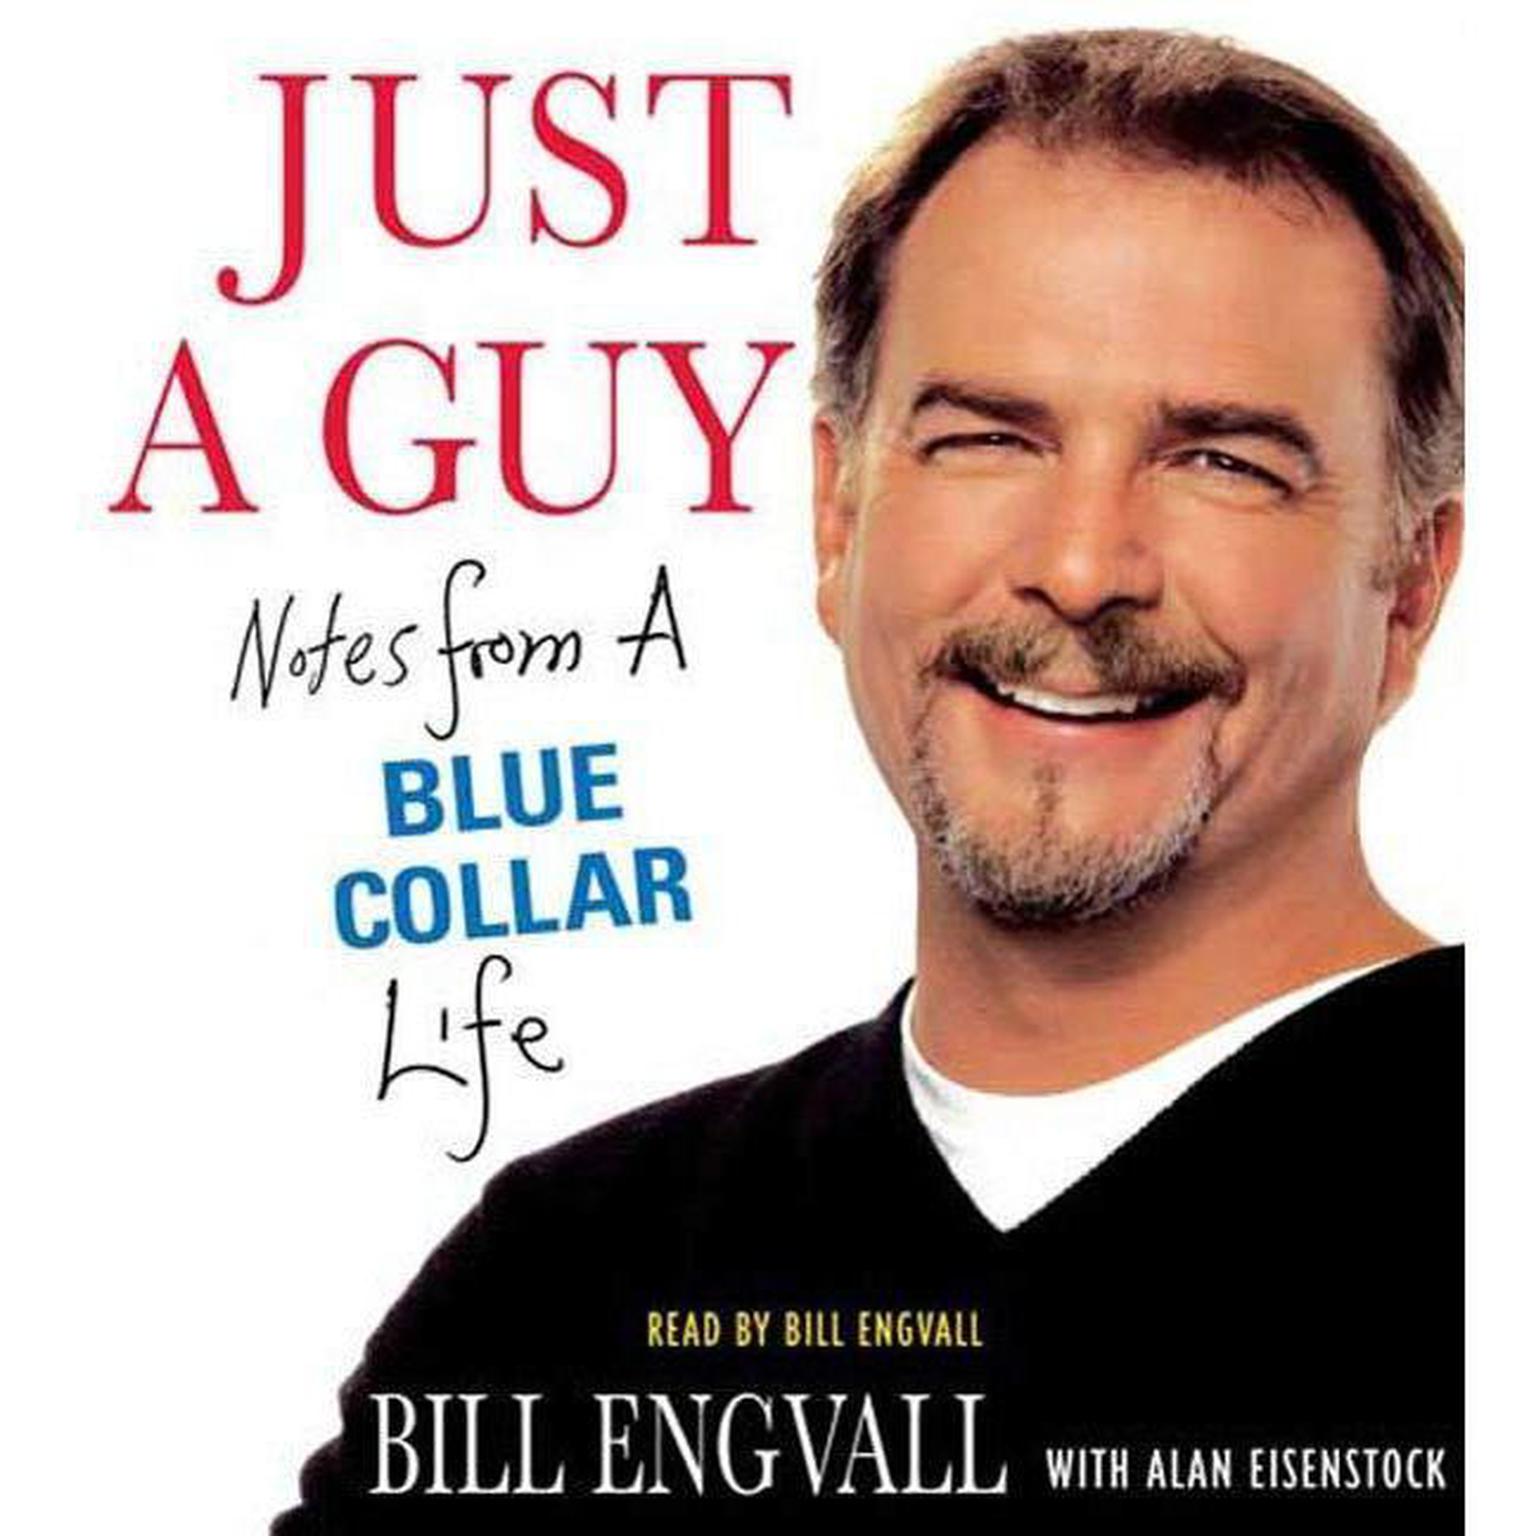 Just a Guy (Abridged): Notes from a Blue Collar Life Audiobook, by Bill Engvall